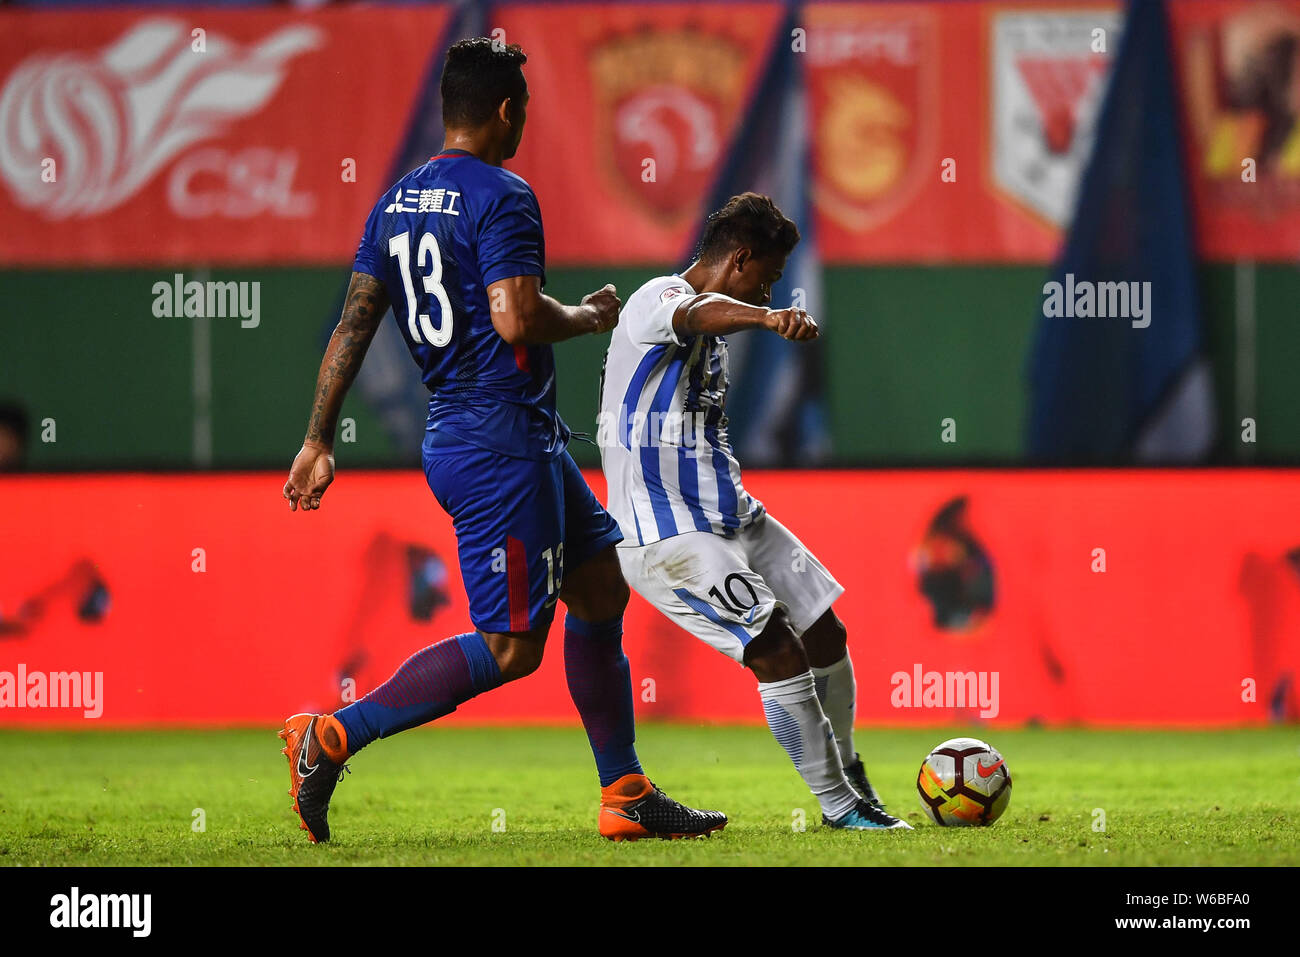 Brazilian football player Renatinho of Guangzhou R&F, right, challenges Colombian football player Fredy Guarin of Shanghai Greenland Shenhua in their Stock Photo